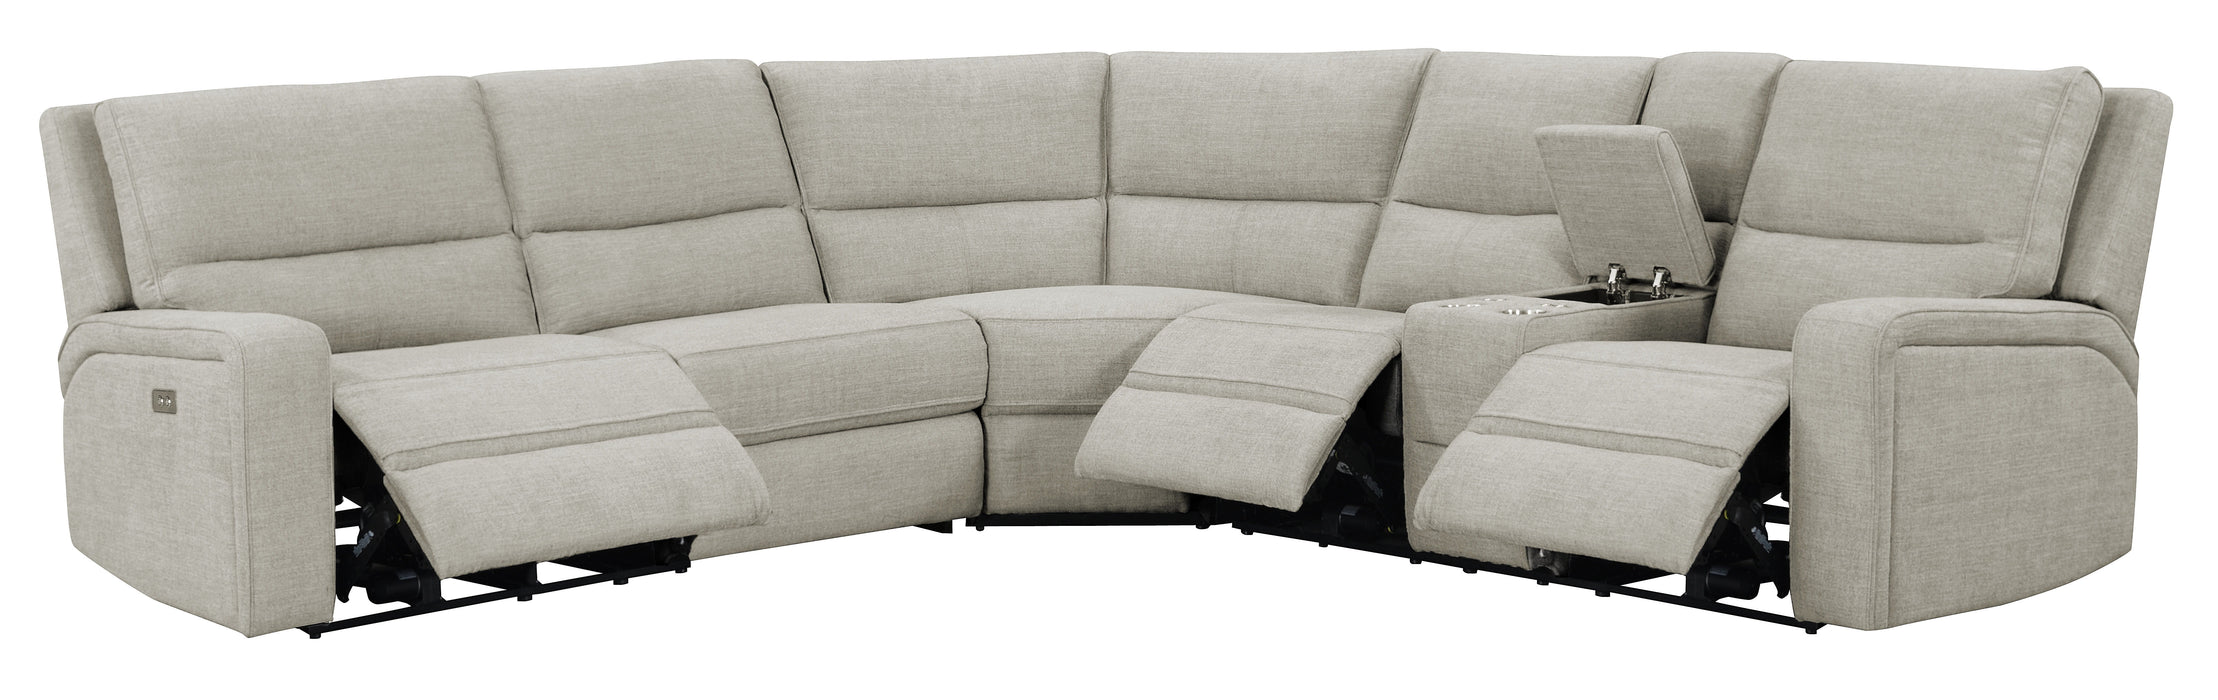 Medford - Sectional - Driftwood Tan - Fabric